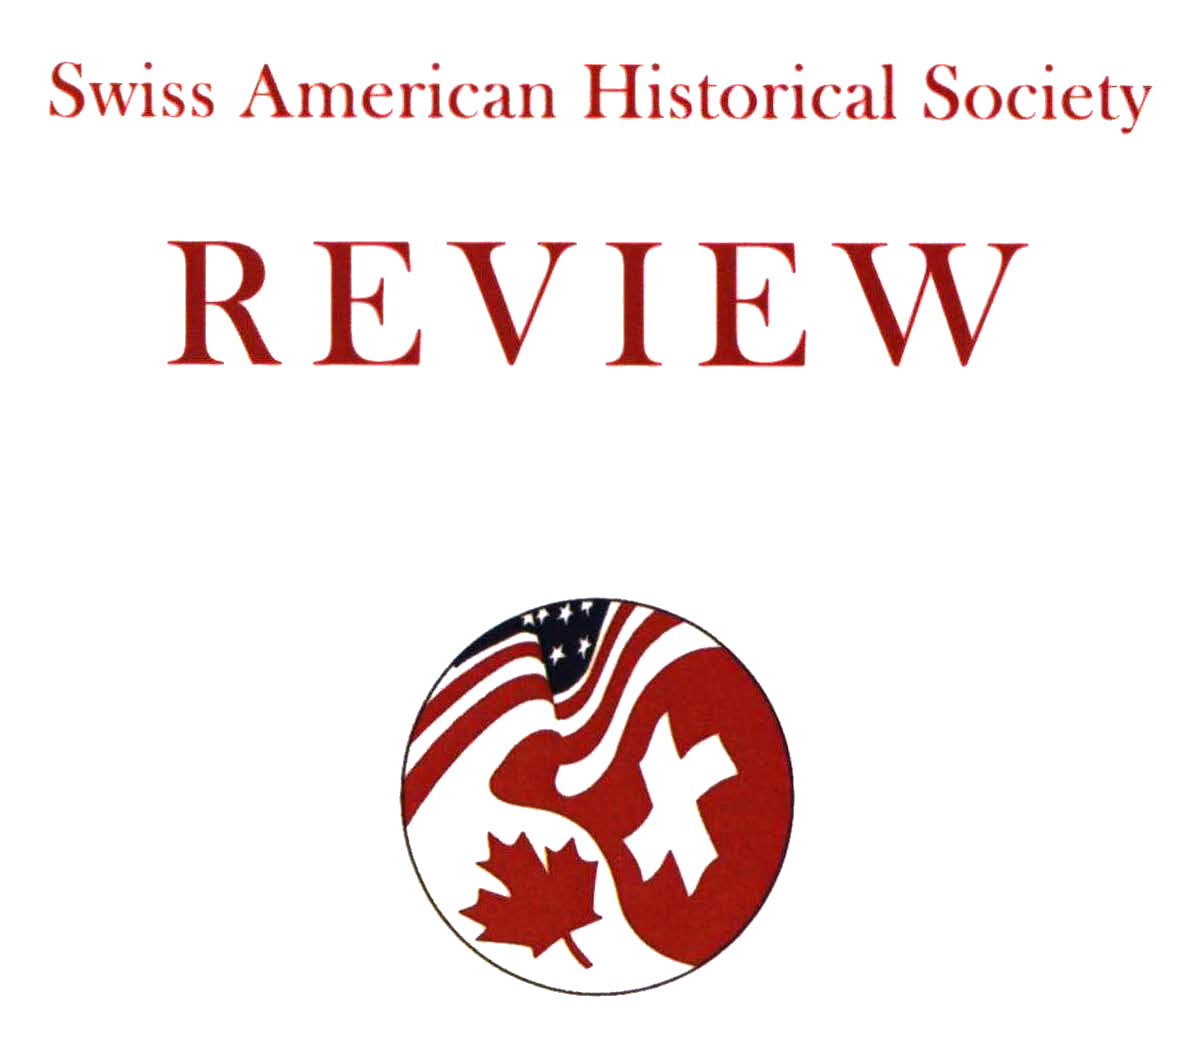 Swiss American Historical Society Review